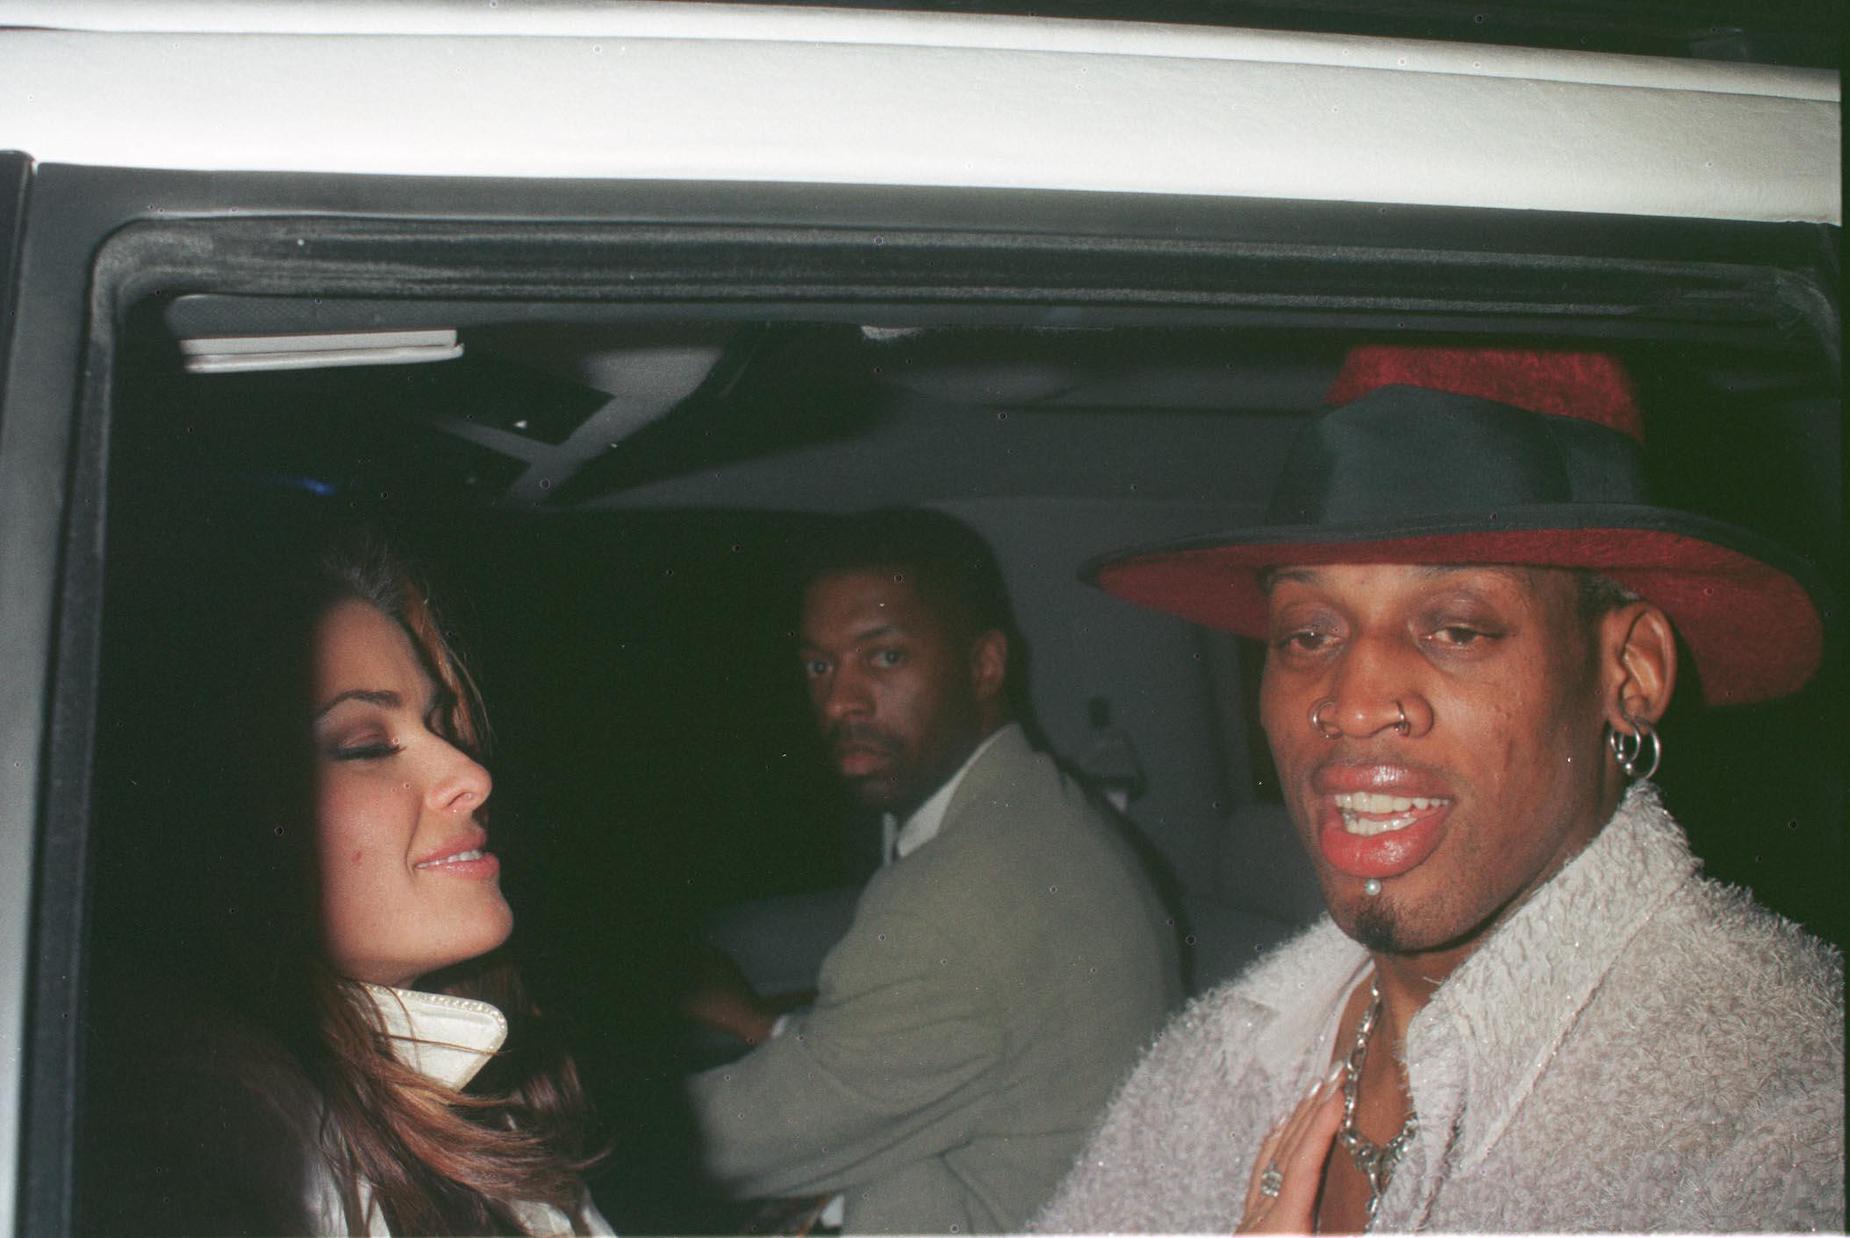 NBA player Dennis Rodman and model Carmen Electra sit in a limousine together in 1999.